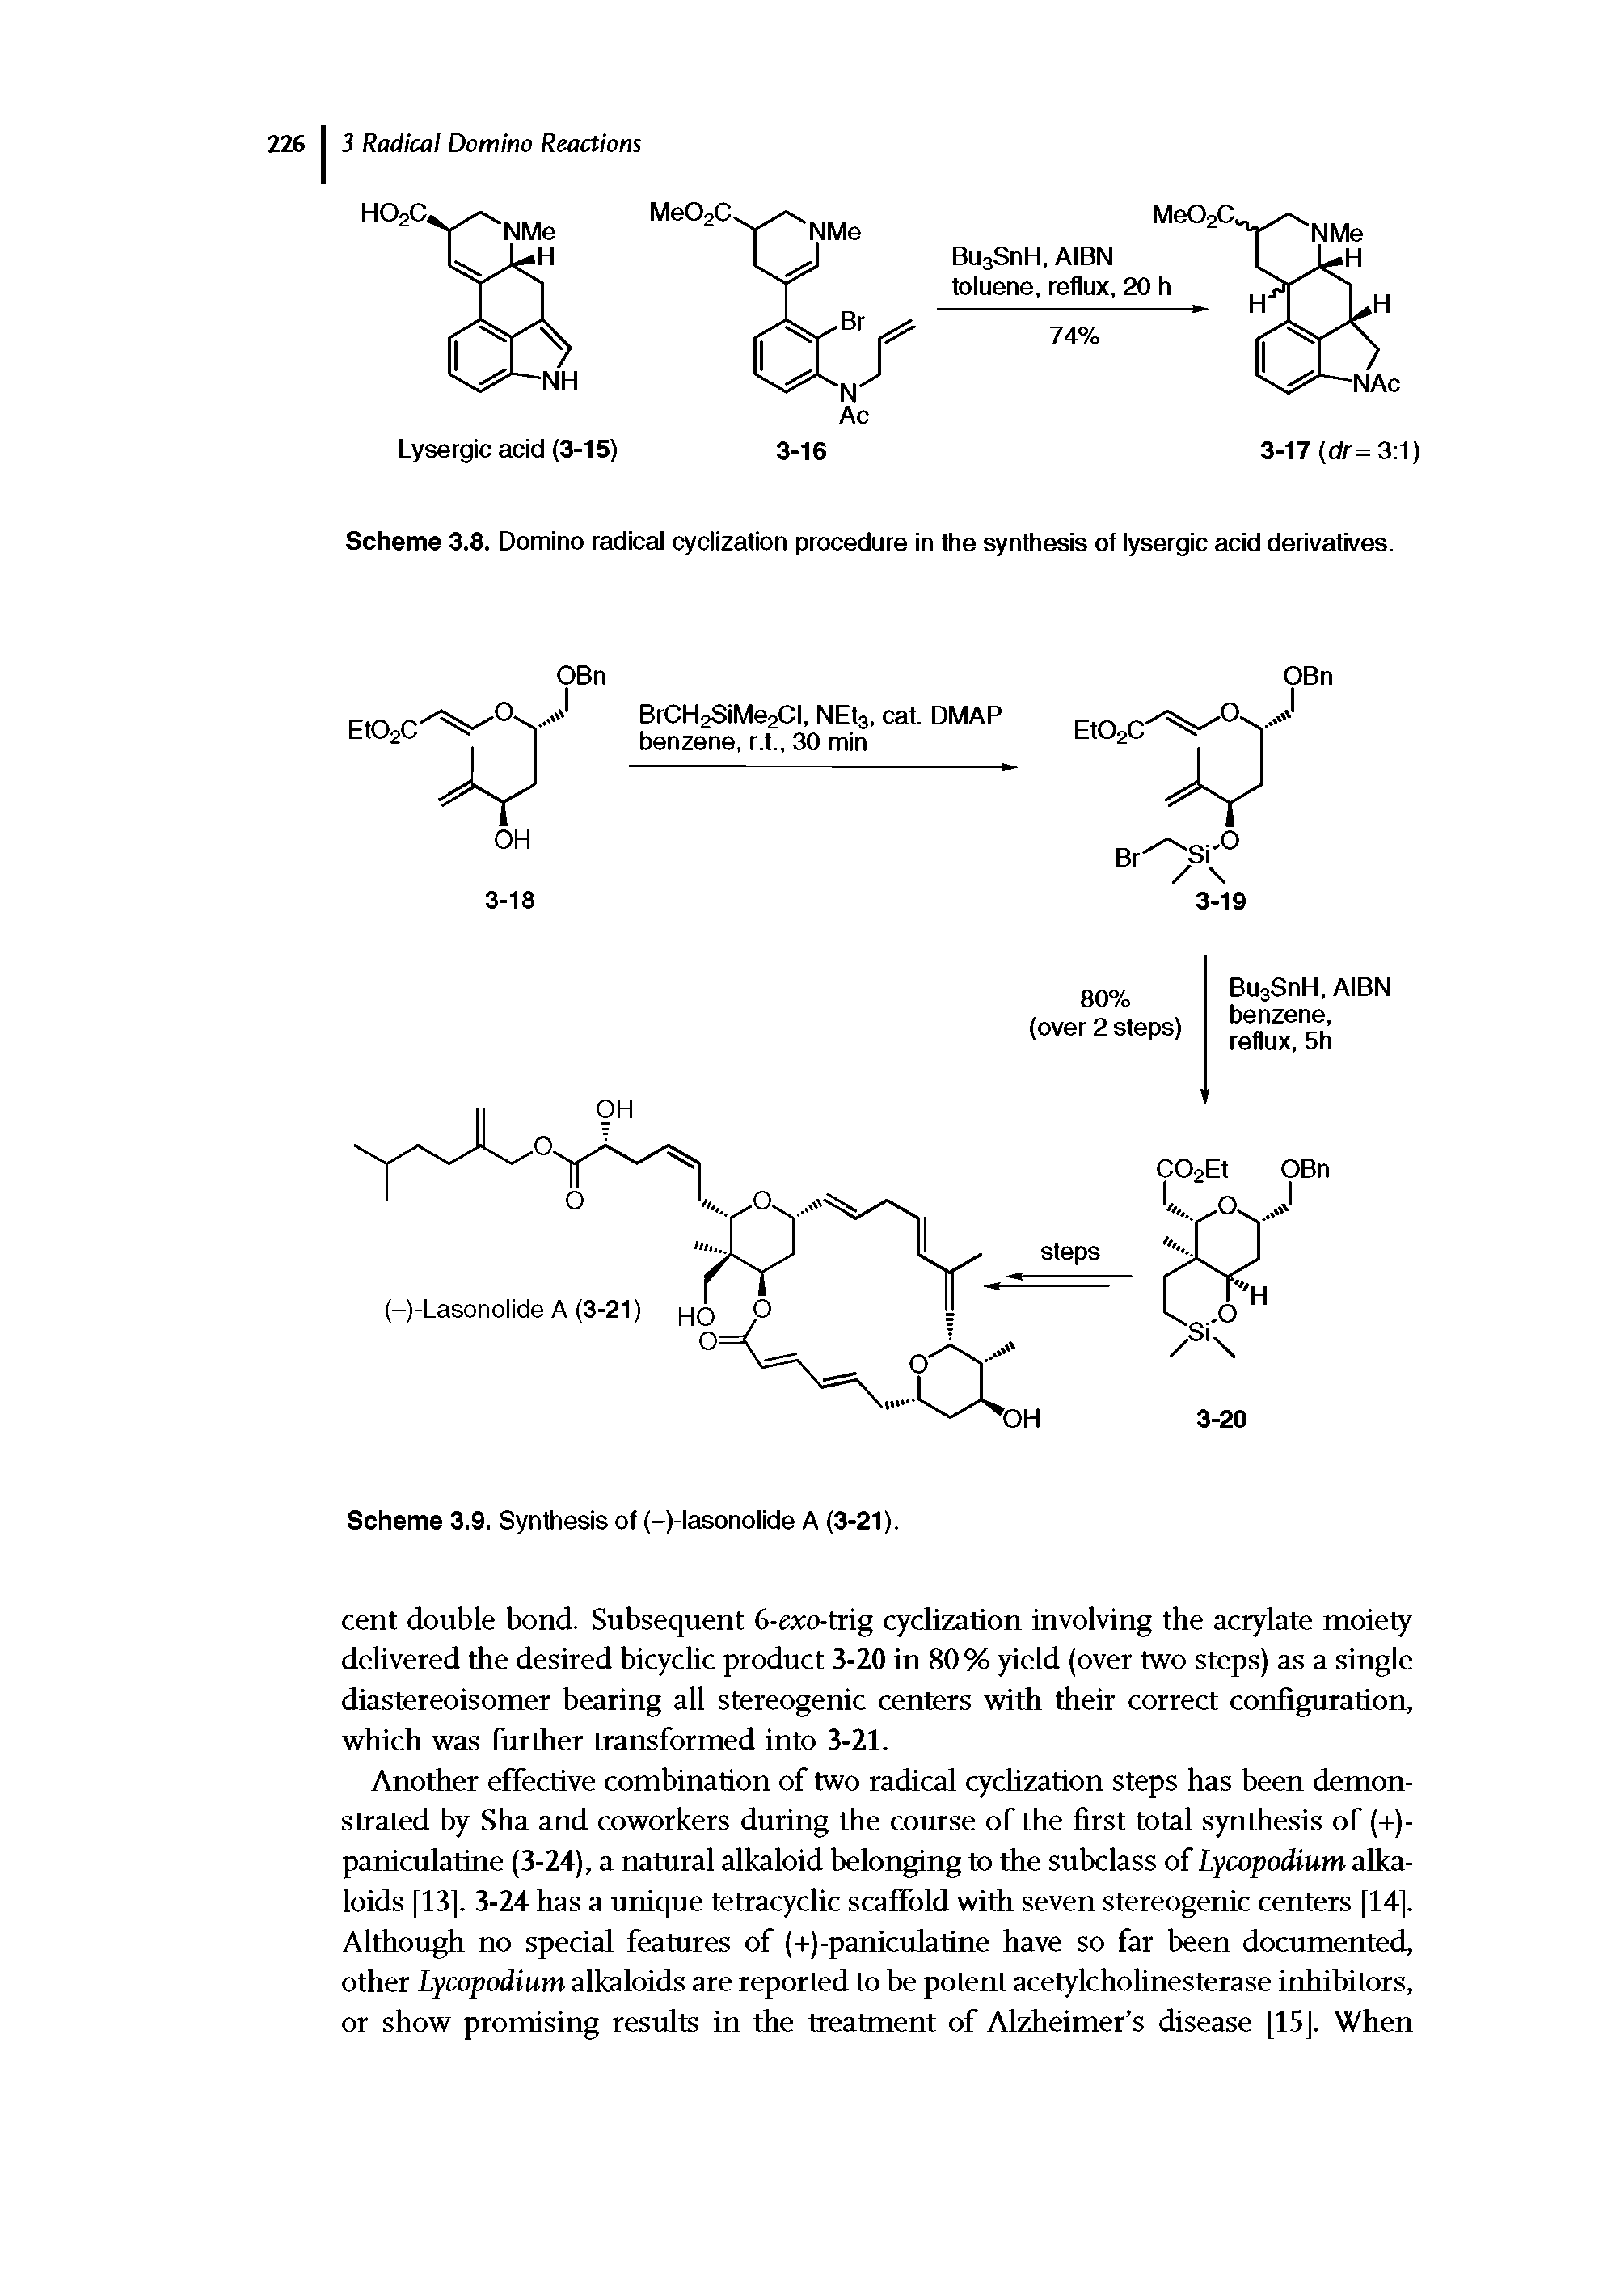 Scheme 3.8. Domino radical cyclization procedure in the synthesis of lysergic acid derivatives.